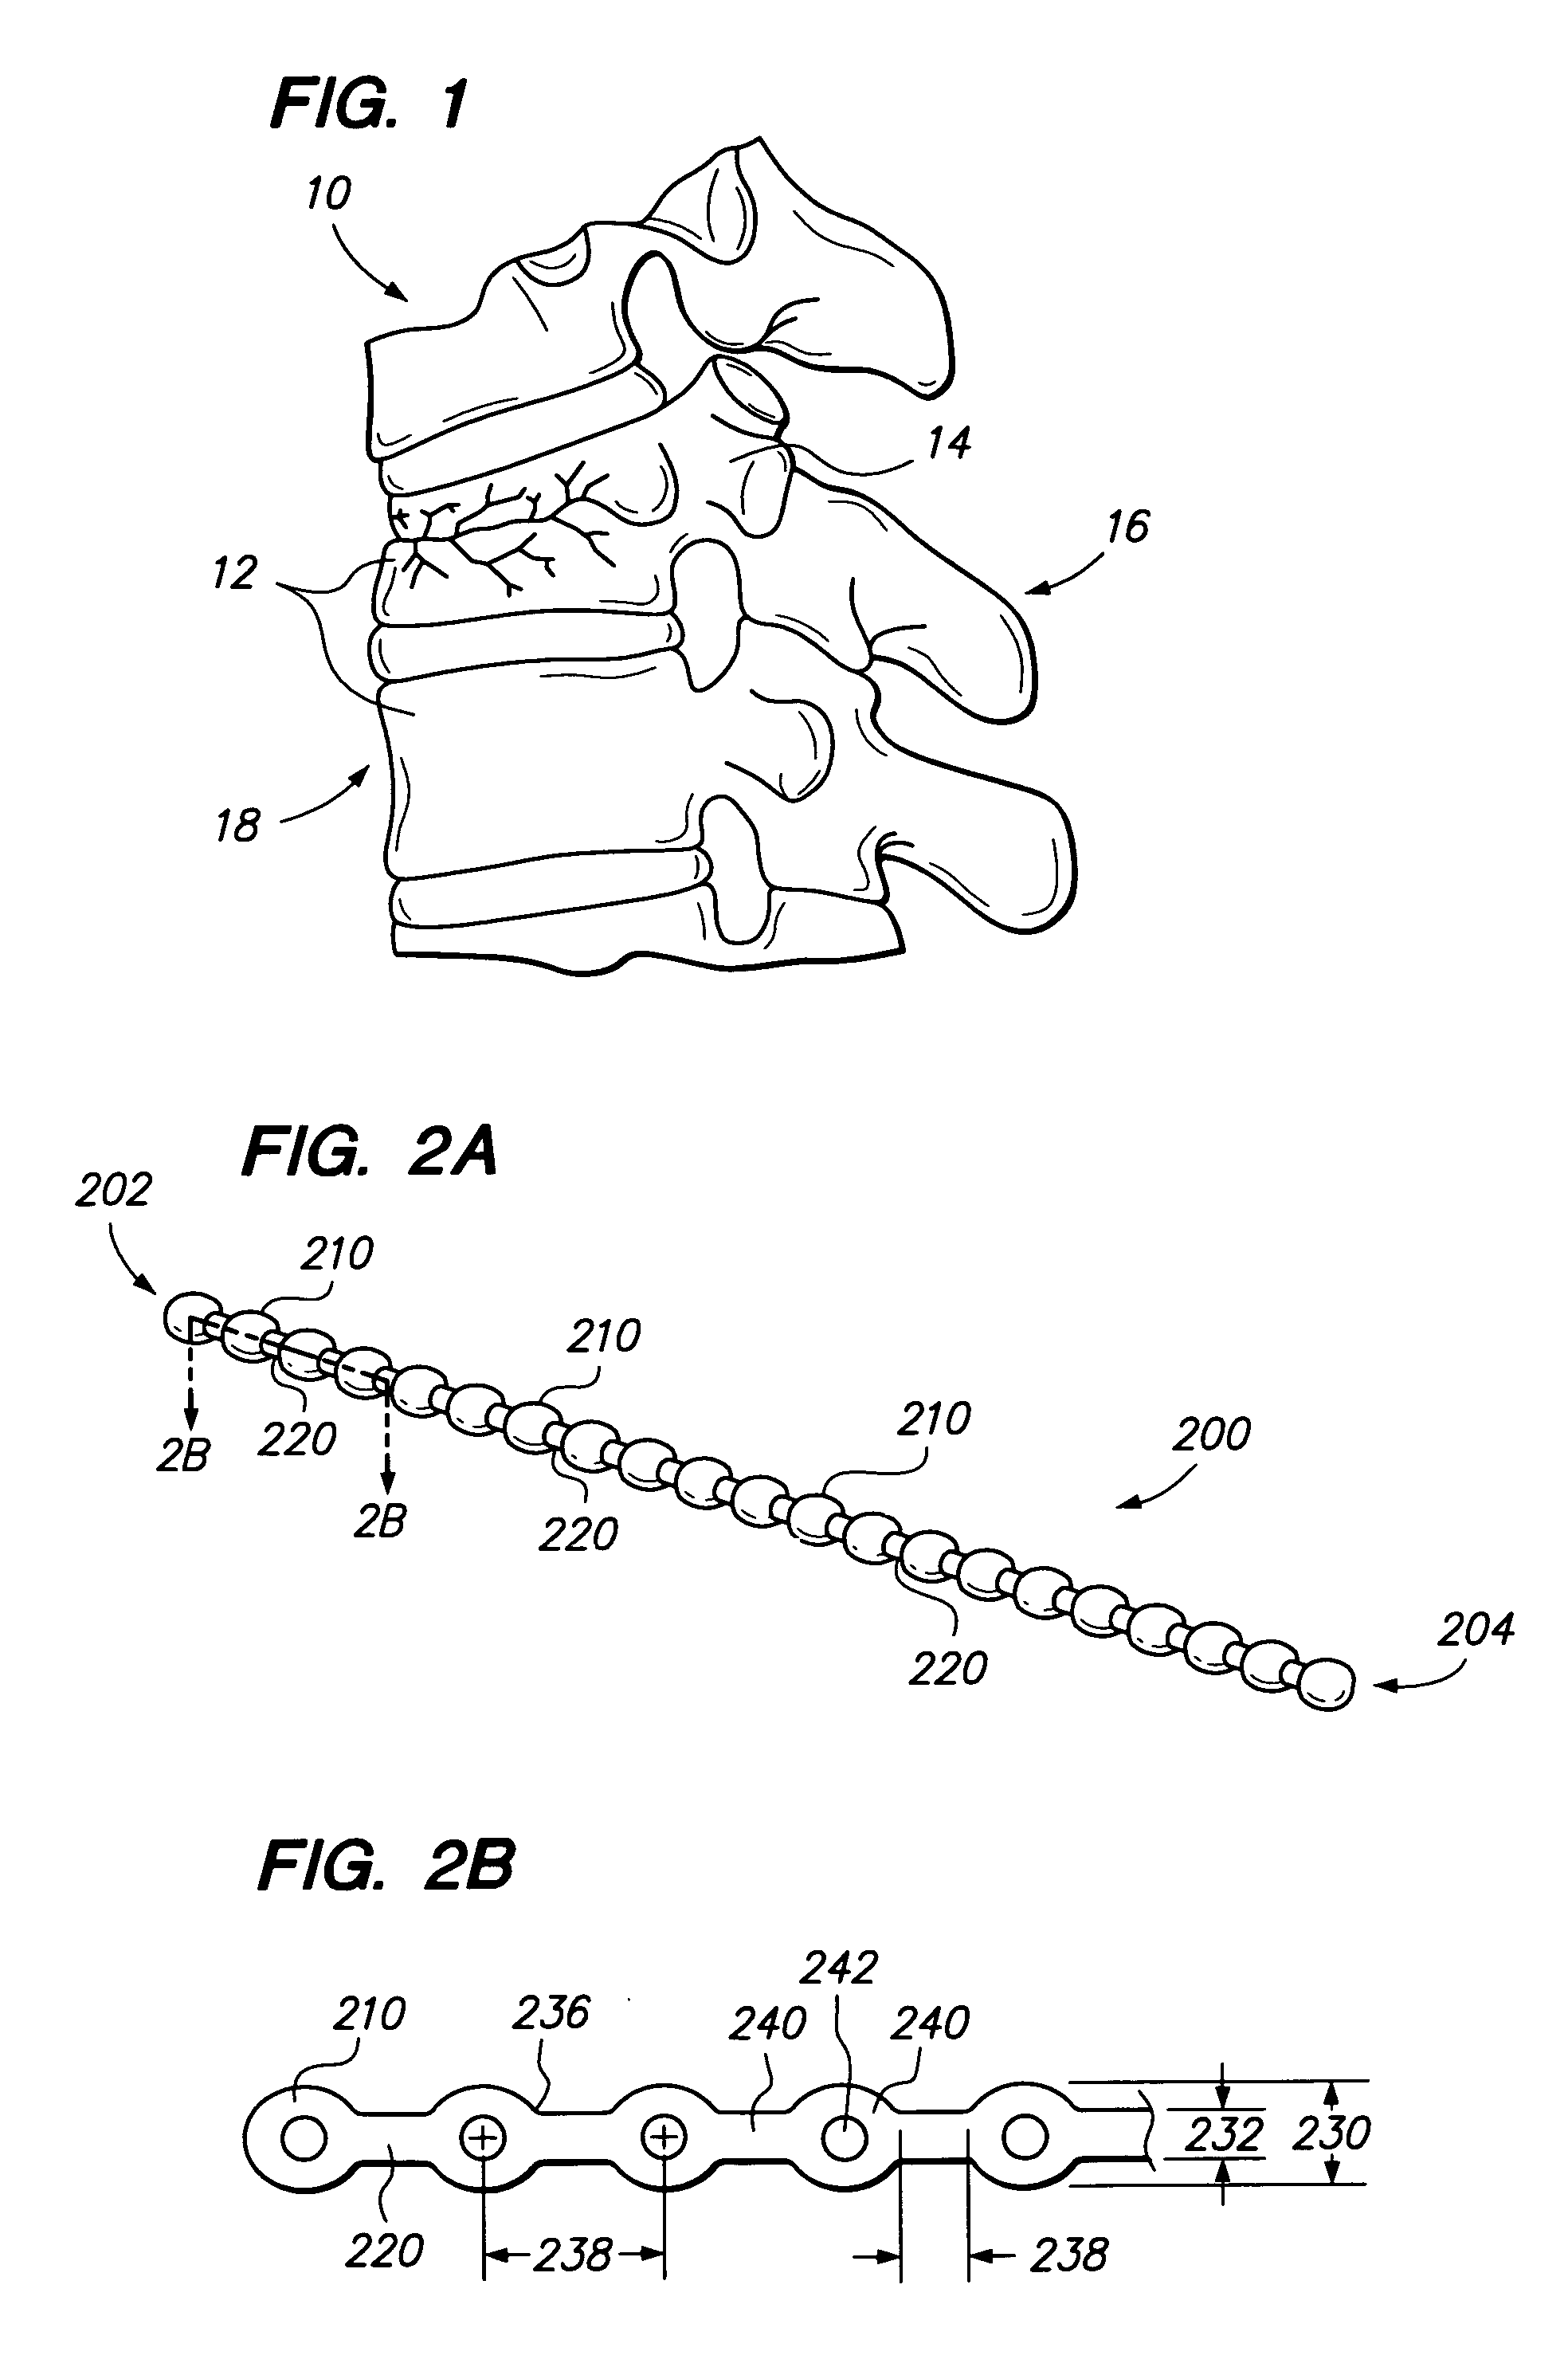 Flexible elongated chain implant and method of supporting body tissue with same